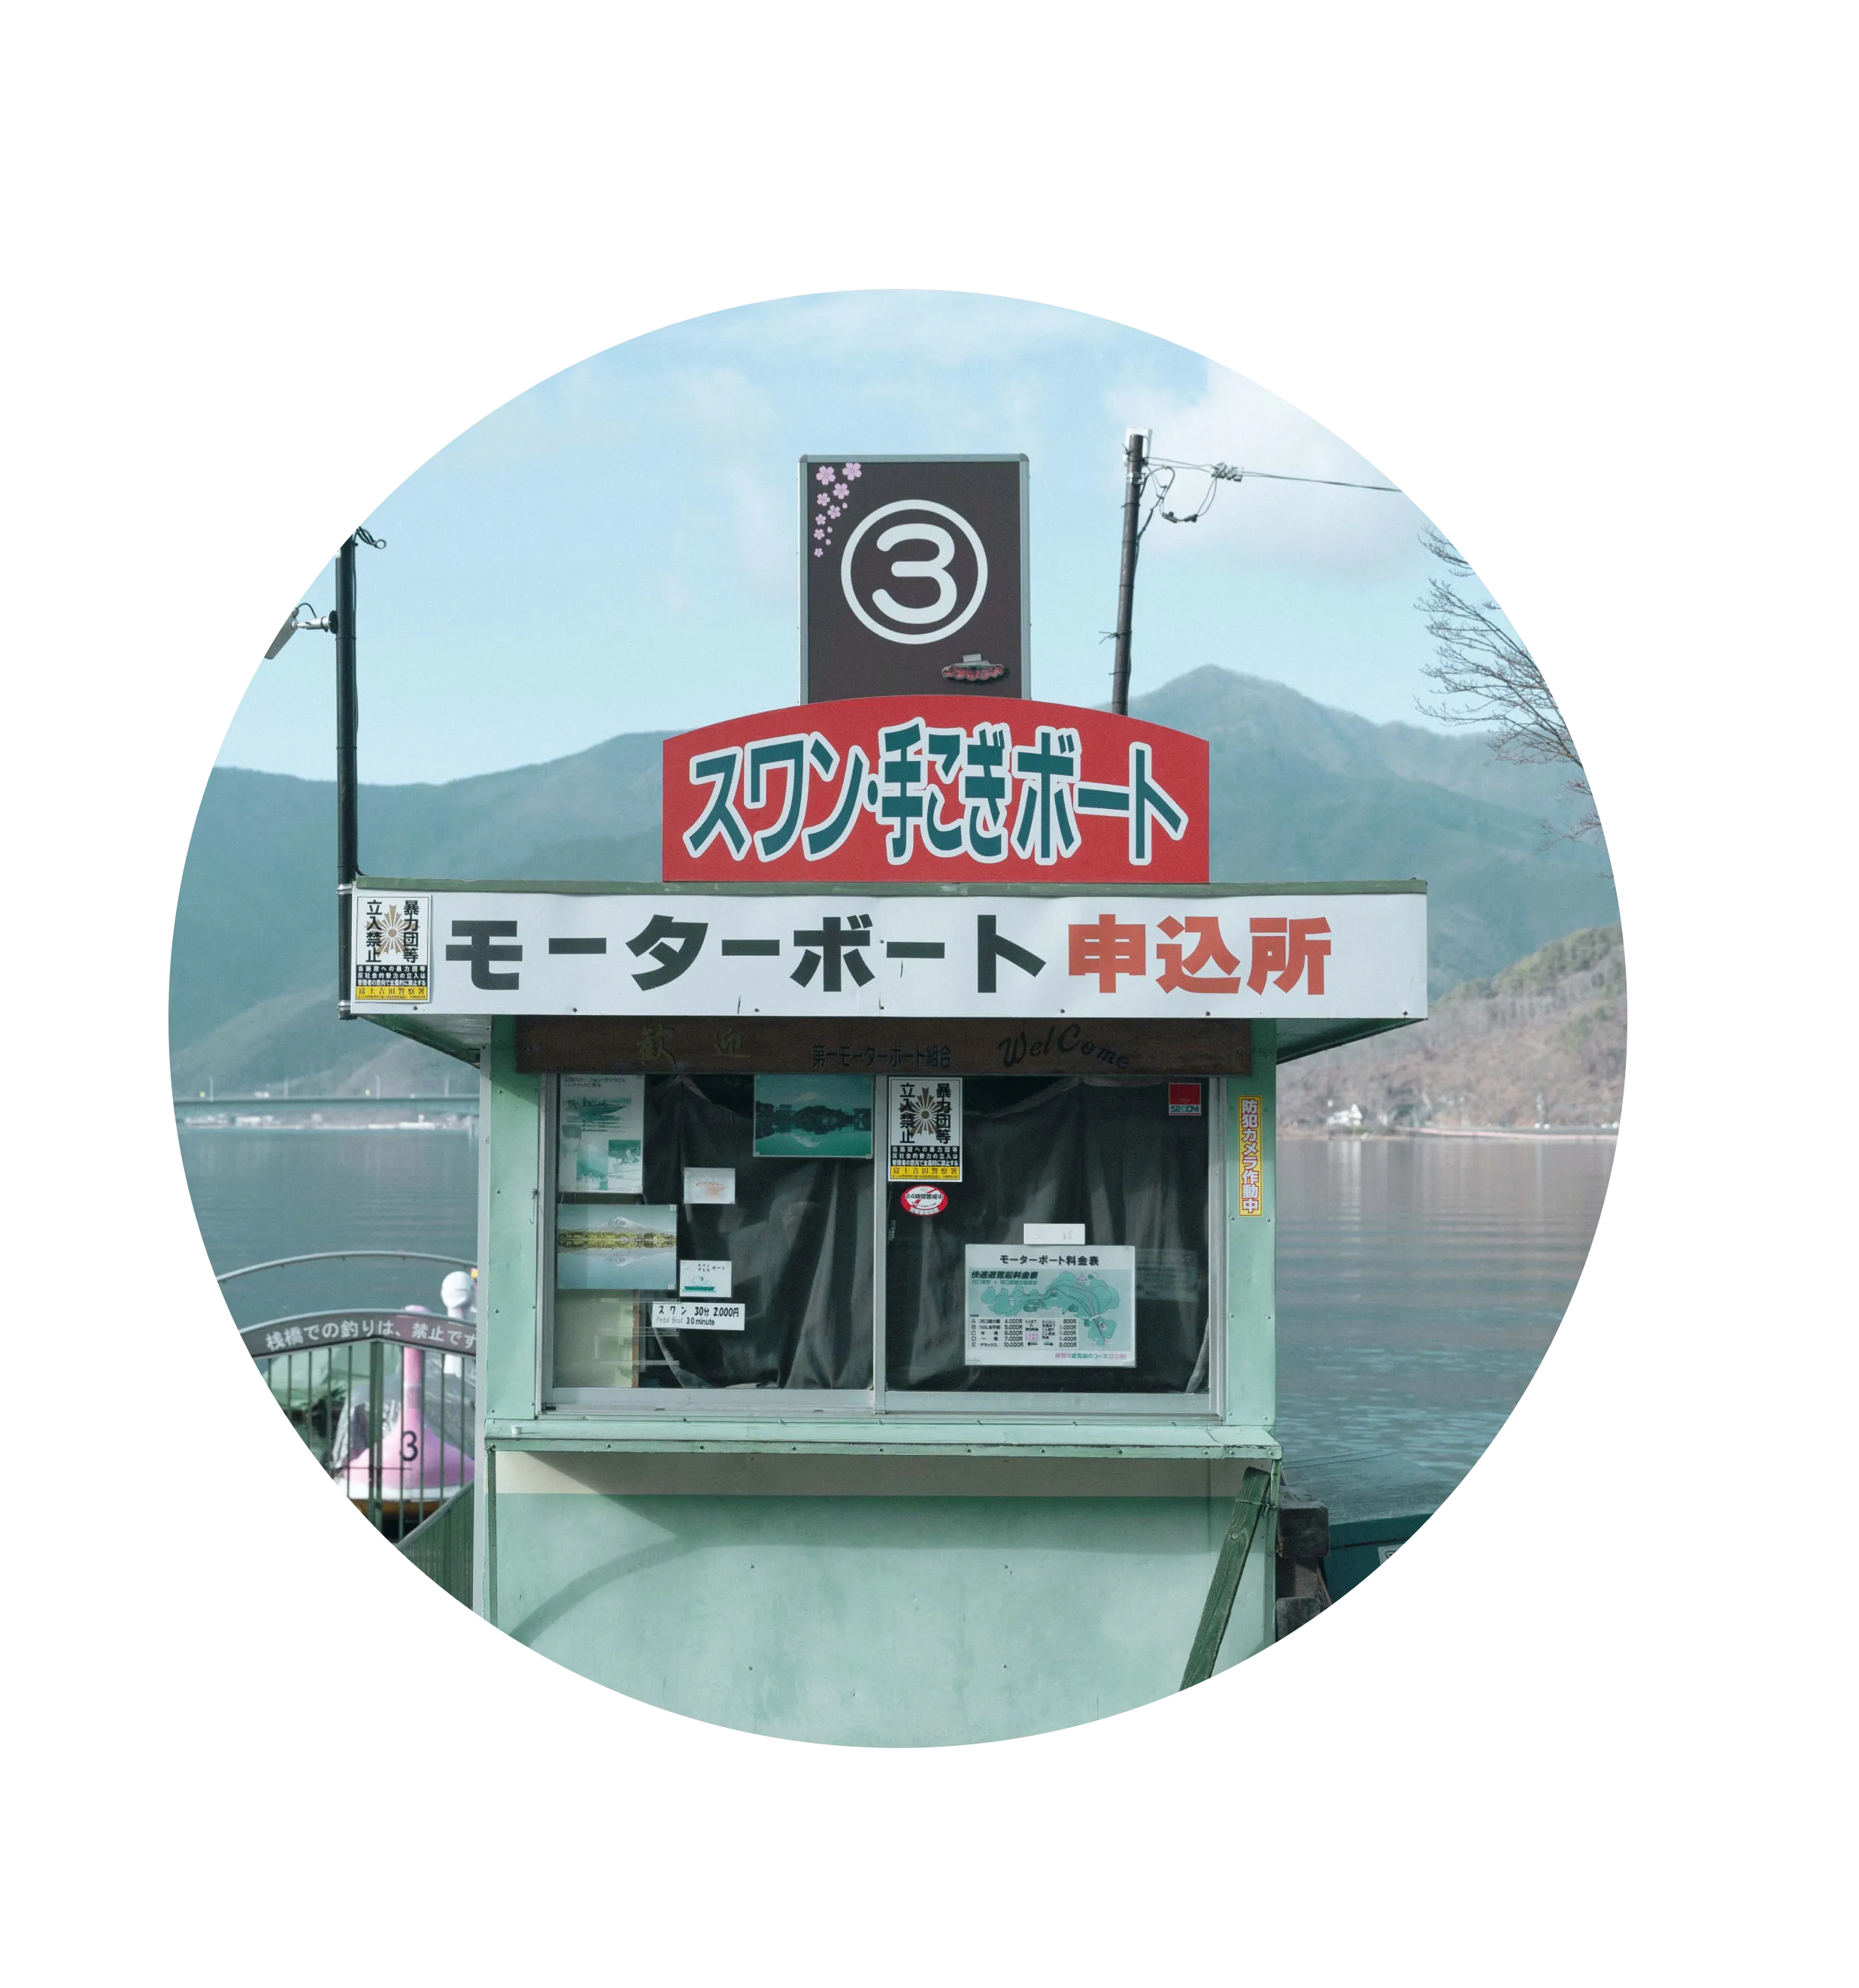 A translate use case featuring an LVF view of a swan boat rental shop with overlaying shapes, icons, and product label.